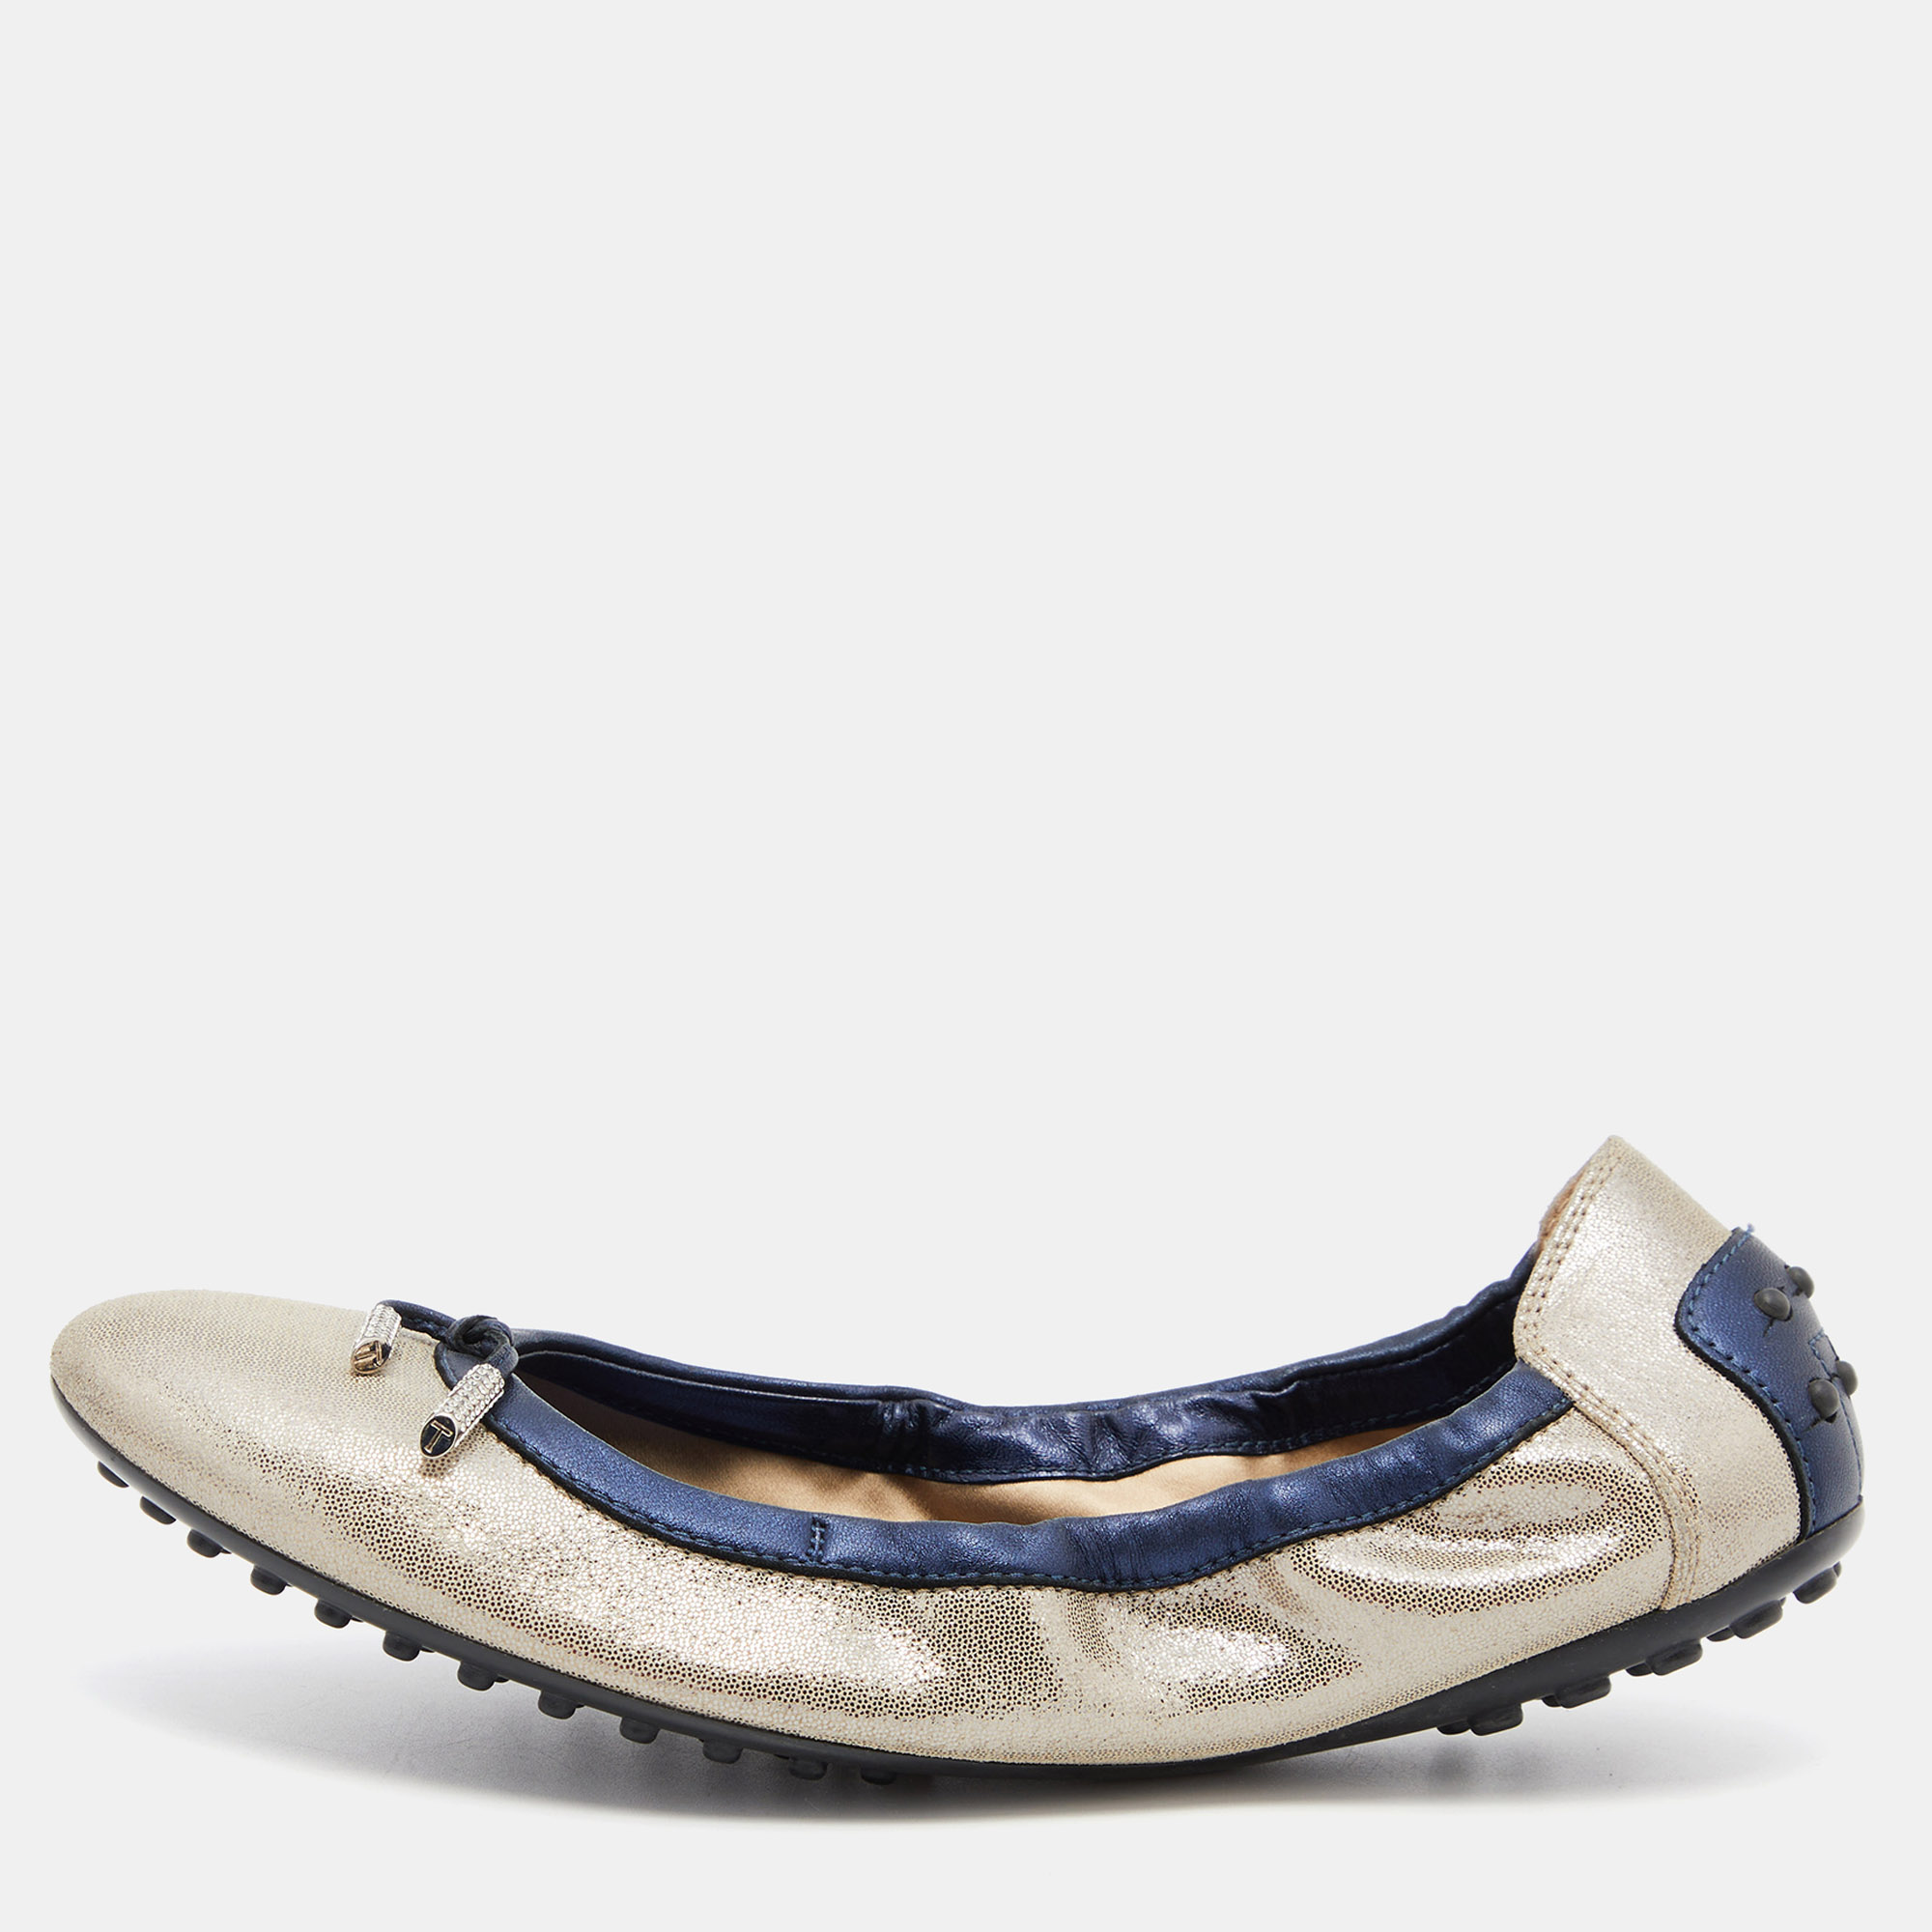 Pre-owned Tod's Silver/blue Textured Nubuck Leather Scrunch Ballet Flats Size 38